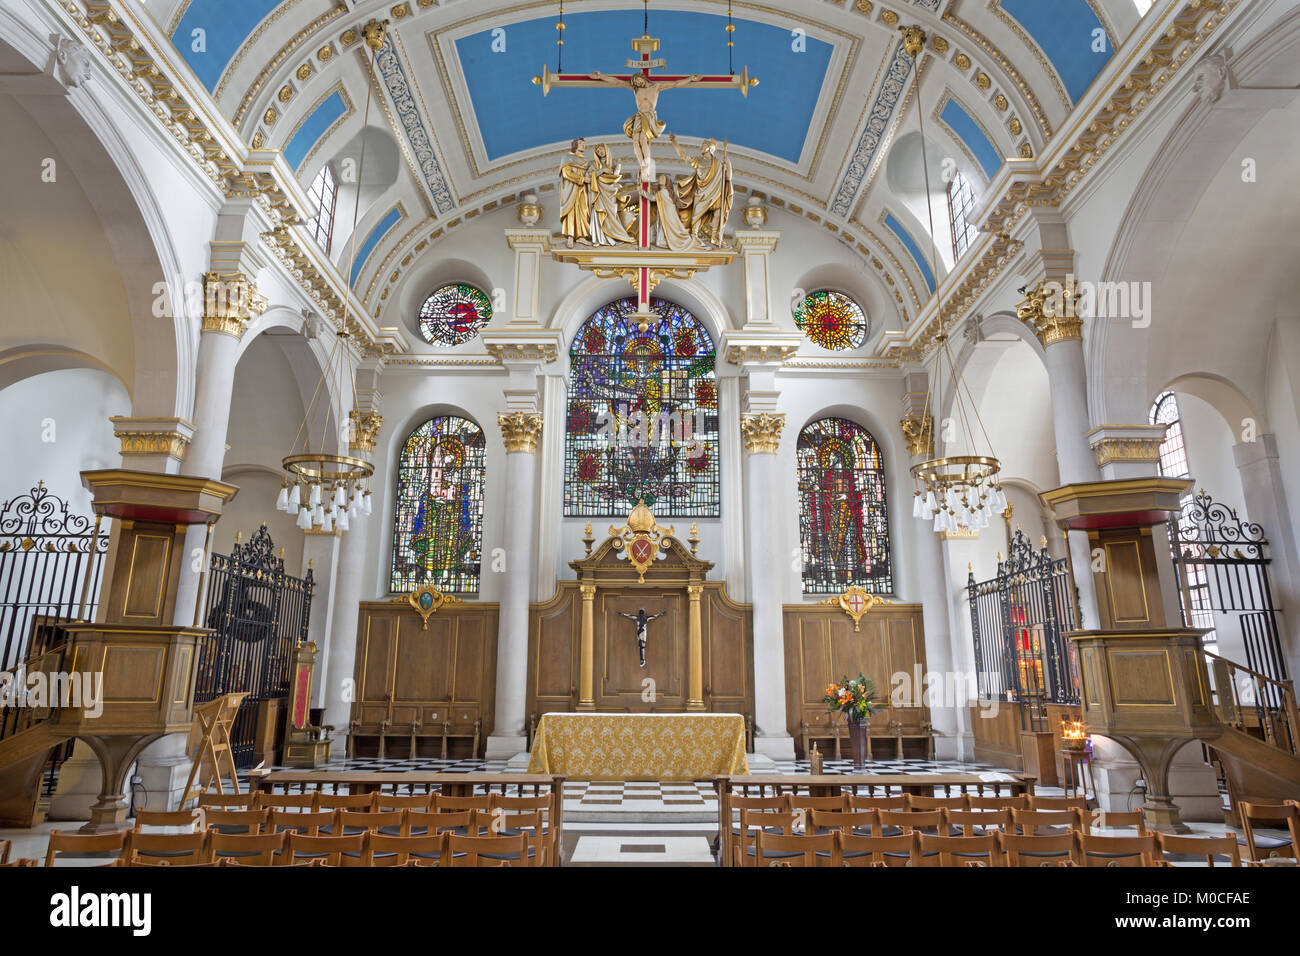 LONDON, GREAT BRITAIN - SEPTEMBER 14, 2017: The nave of church St. Mary le Bow. Stock Photo